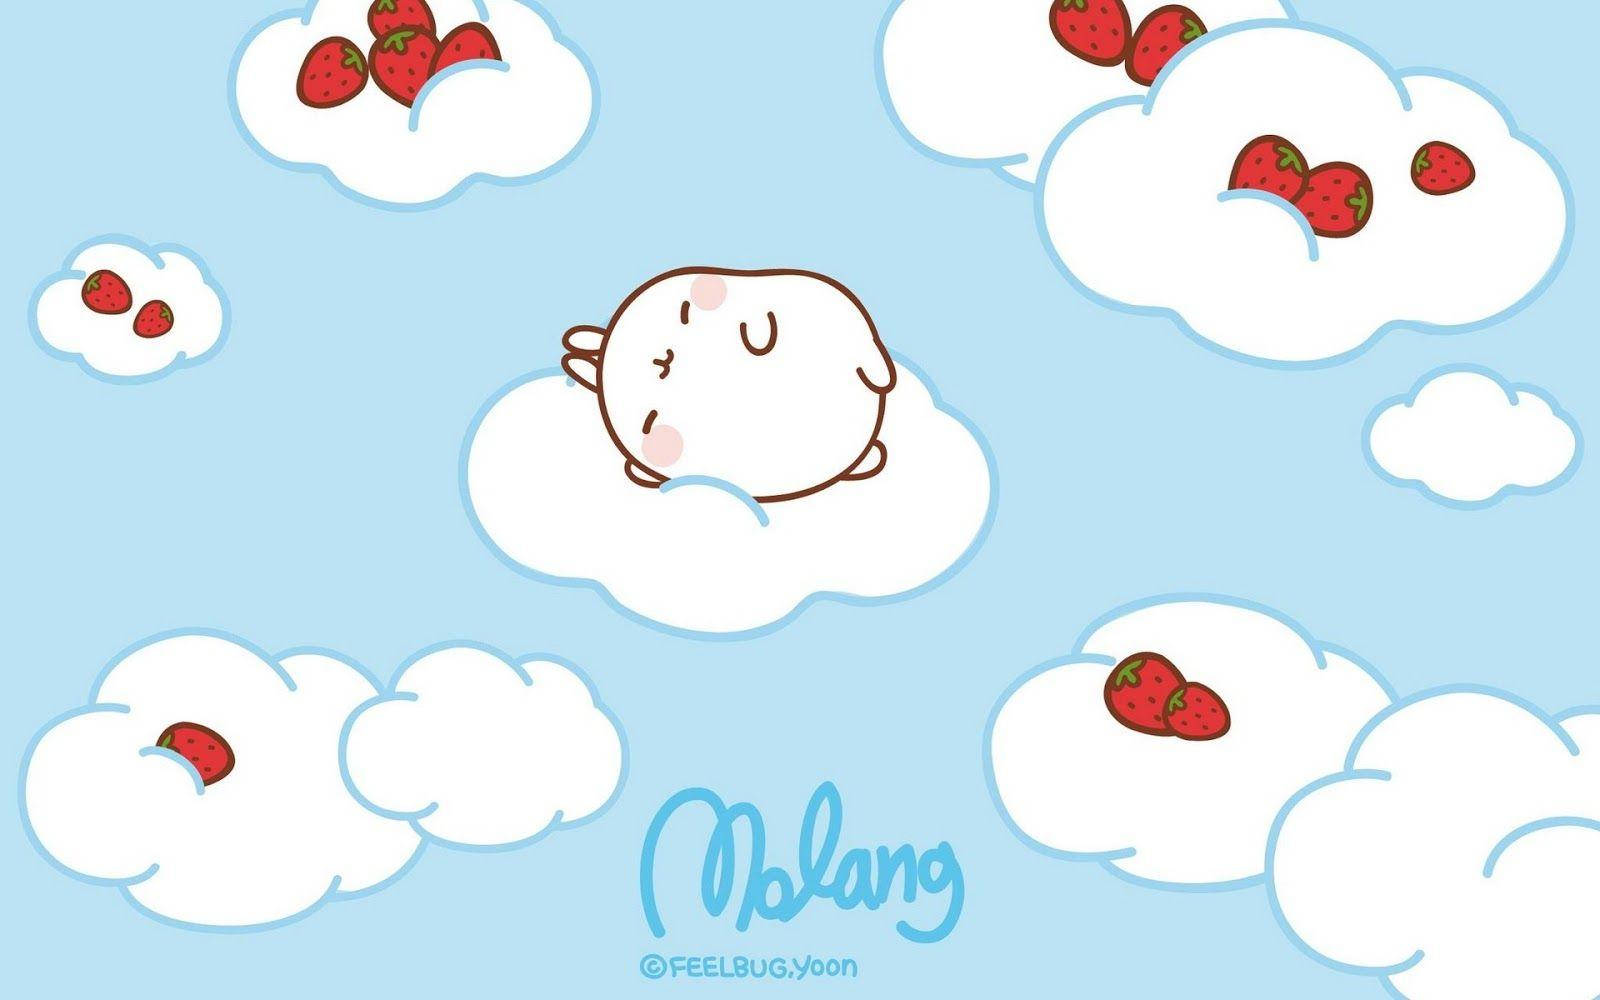 Molang On A Cloud